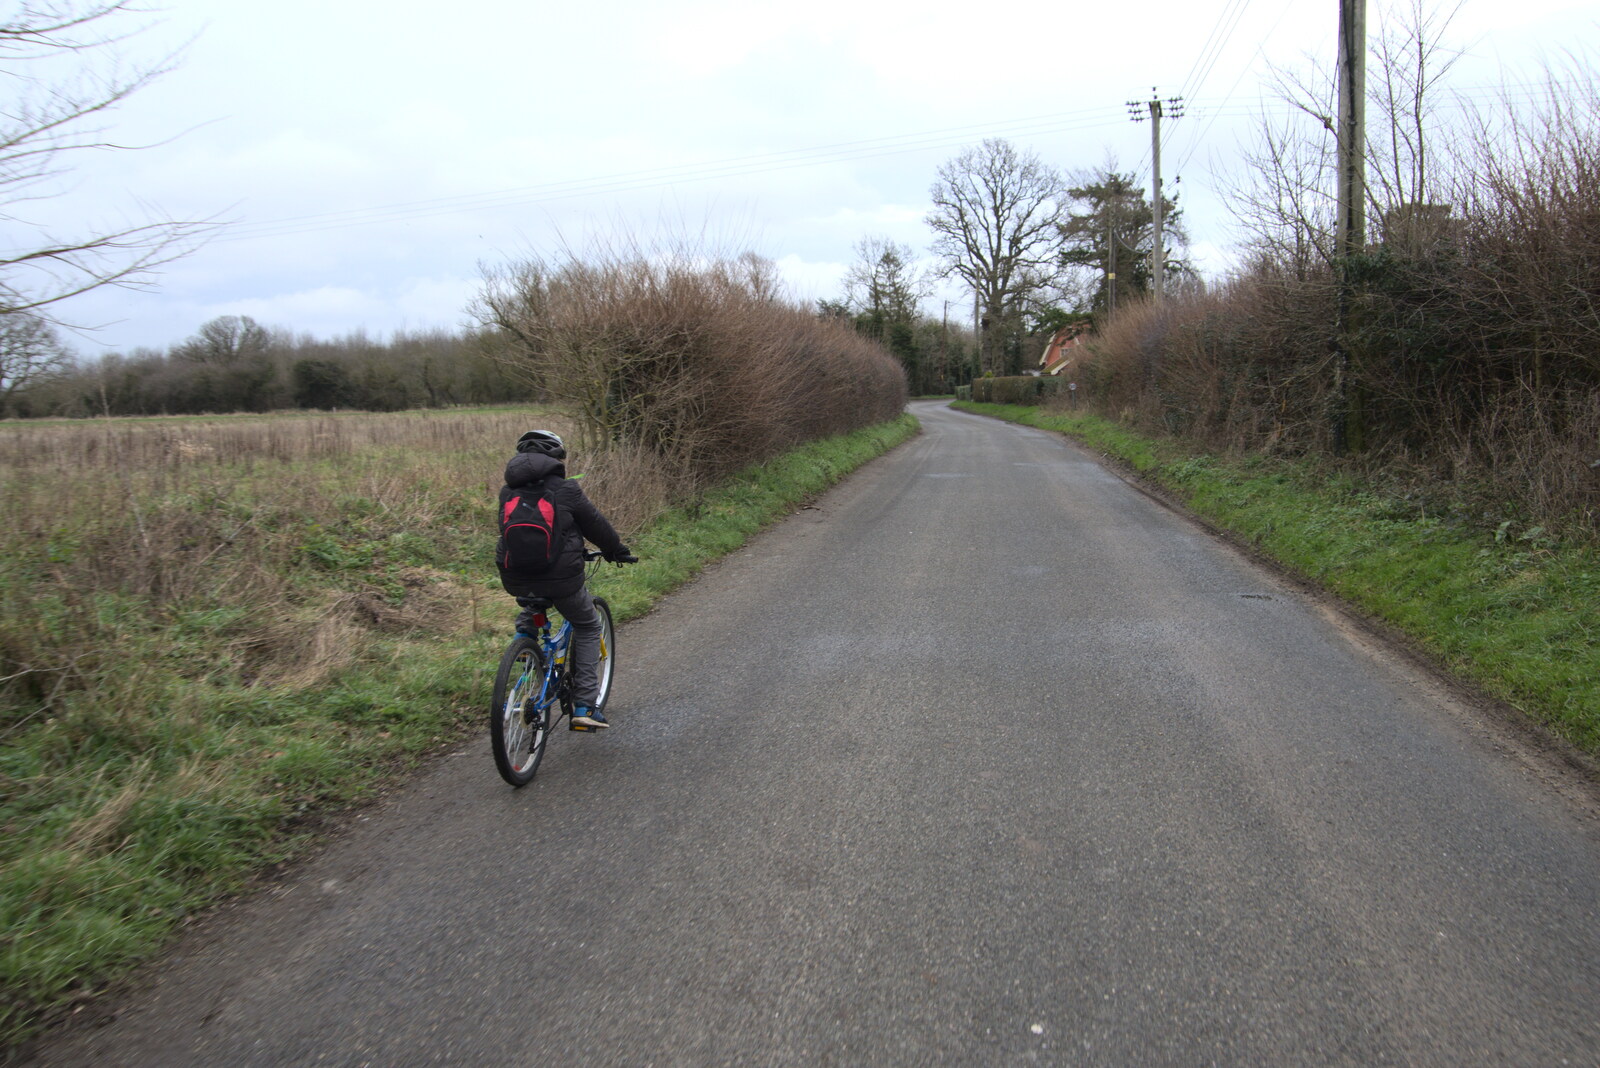 Fred on a bike from The Old Sewage Works, The Avenue, Brome, Suffolk - 20th February 2021